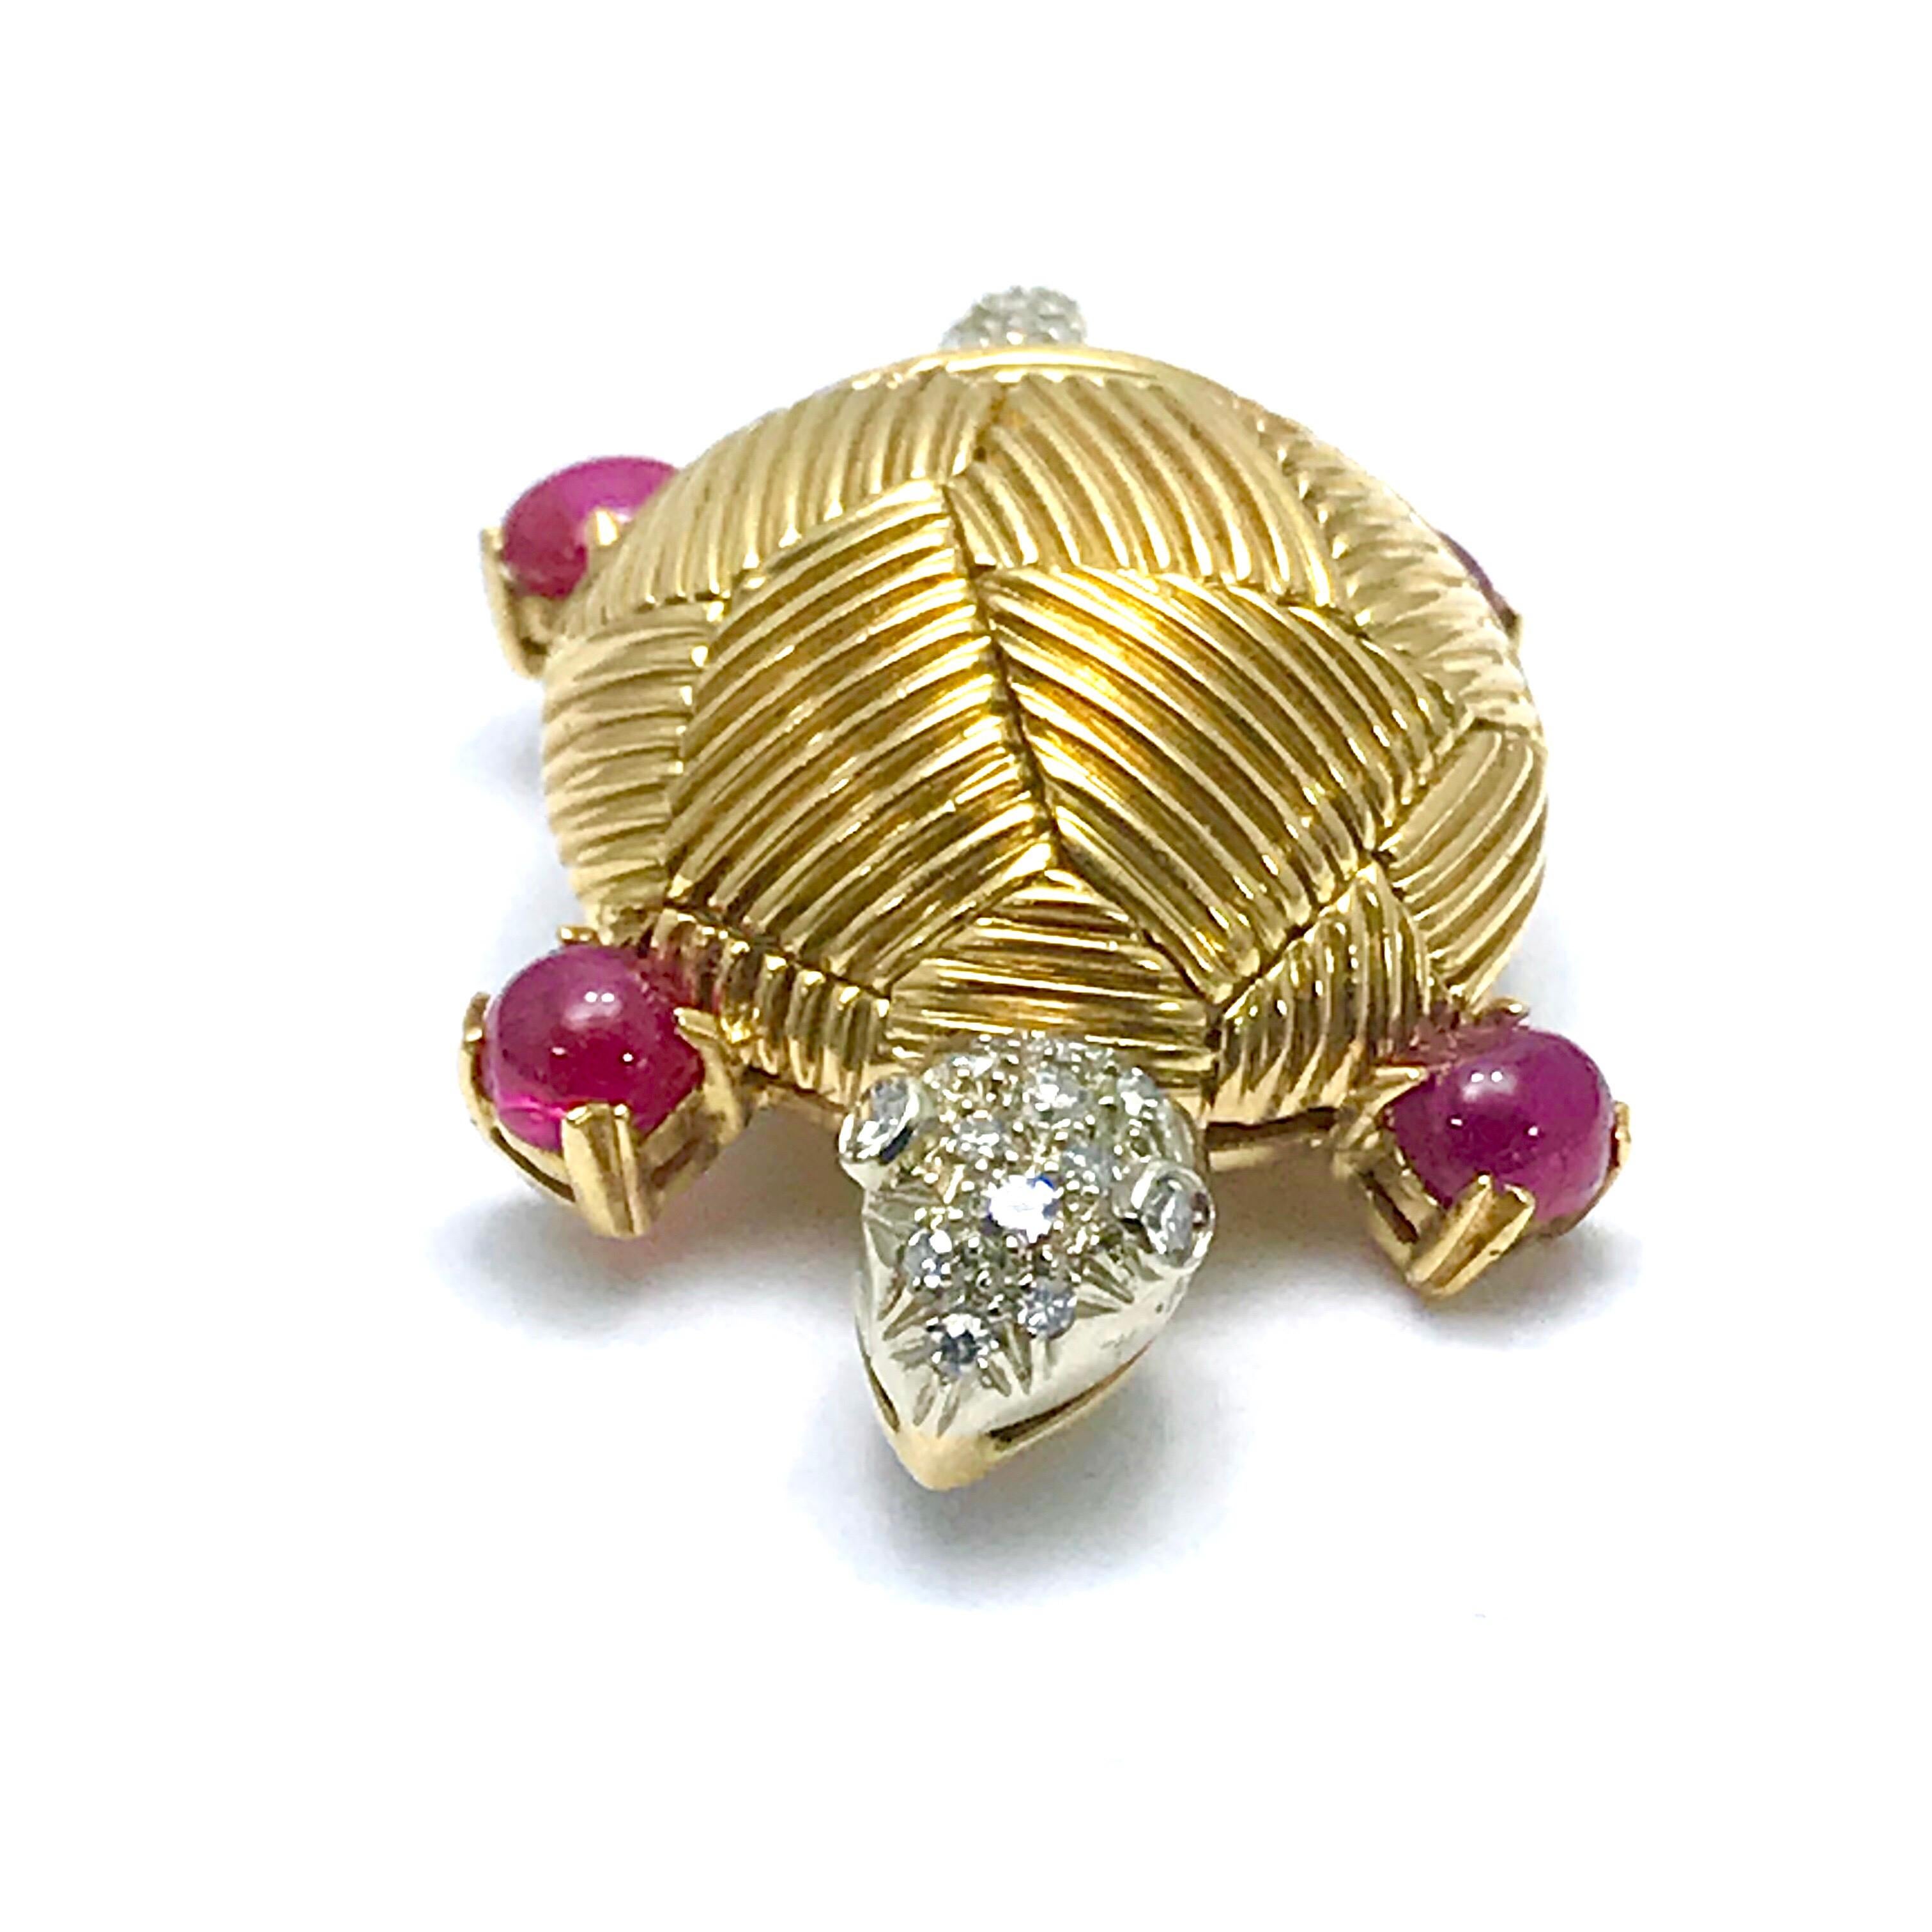 Retro Van Cleef & Arpels Cabochon Ruby and Diamond Yellow Gold Turtle Brooch